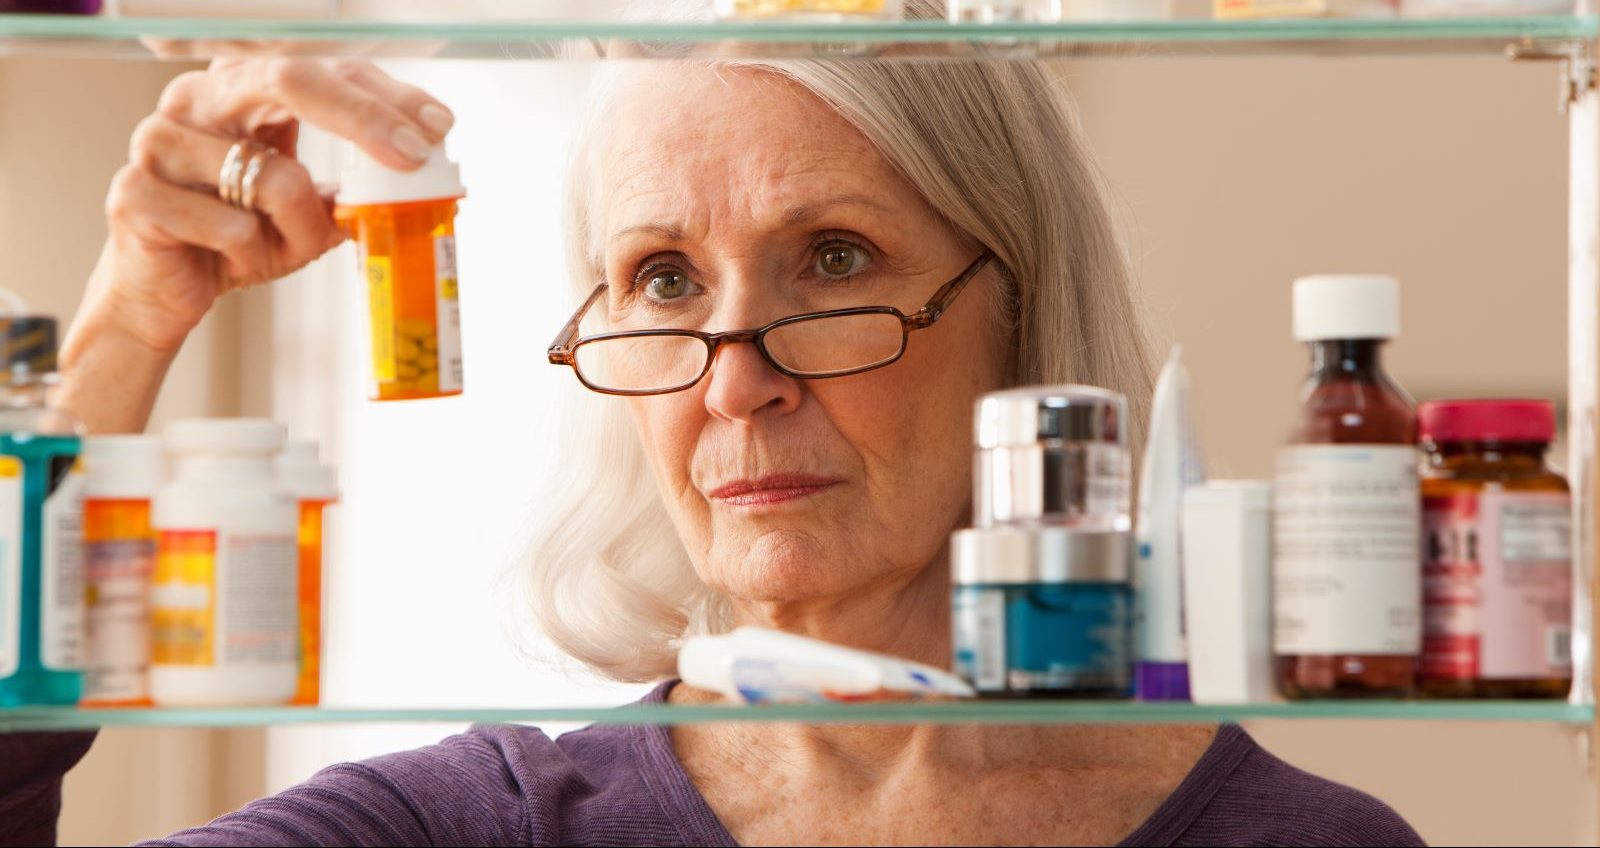 Taking too many medications can be dangerous for older adults.